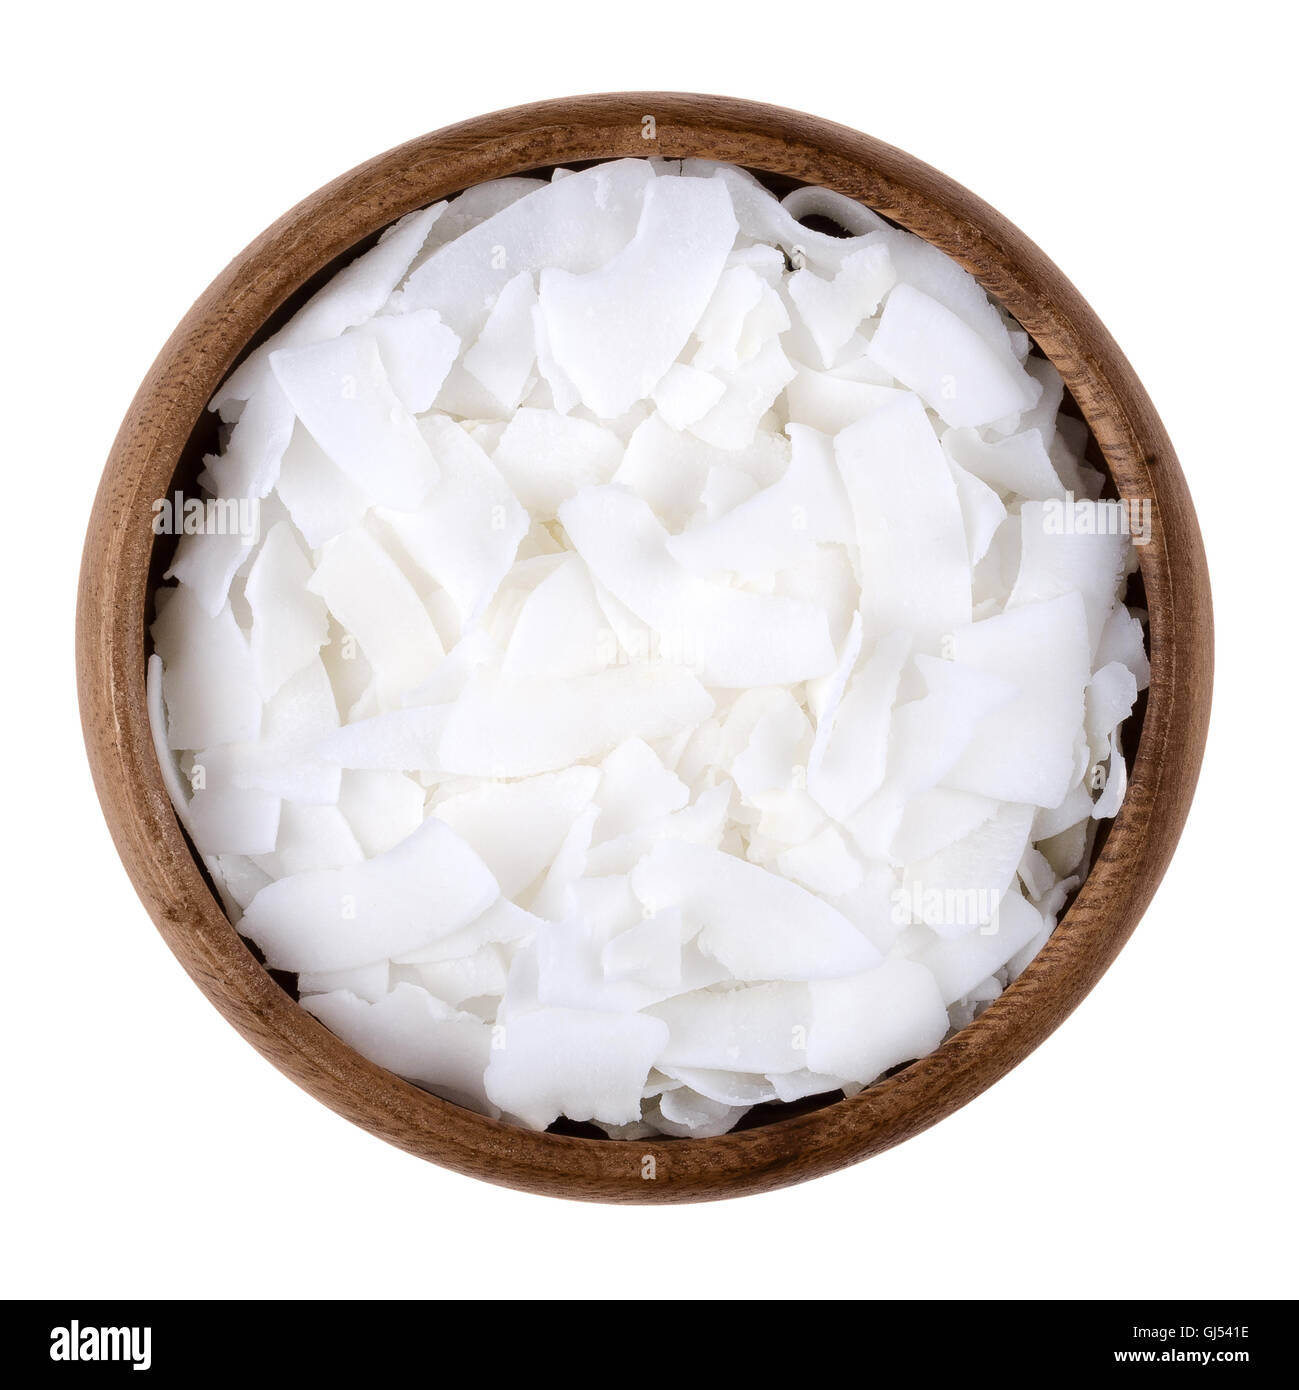 Coconut flakes in a bowl on white background, also called copra. Dried and grated flesh or meat of the coconut kernel. Stock Photo